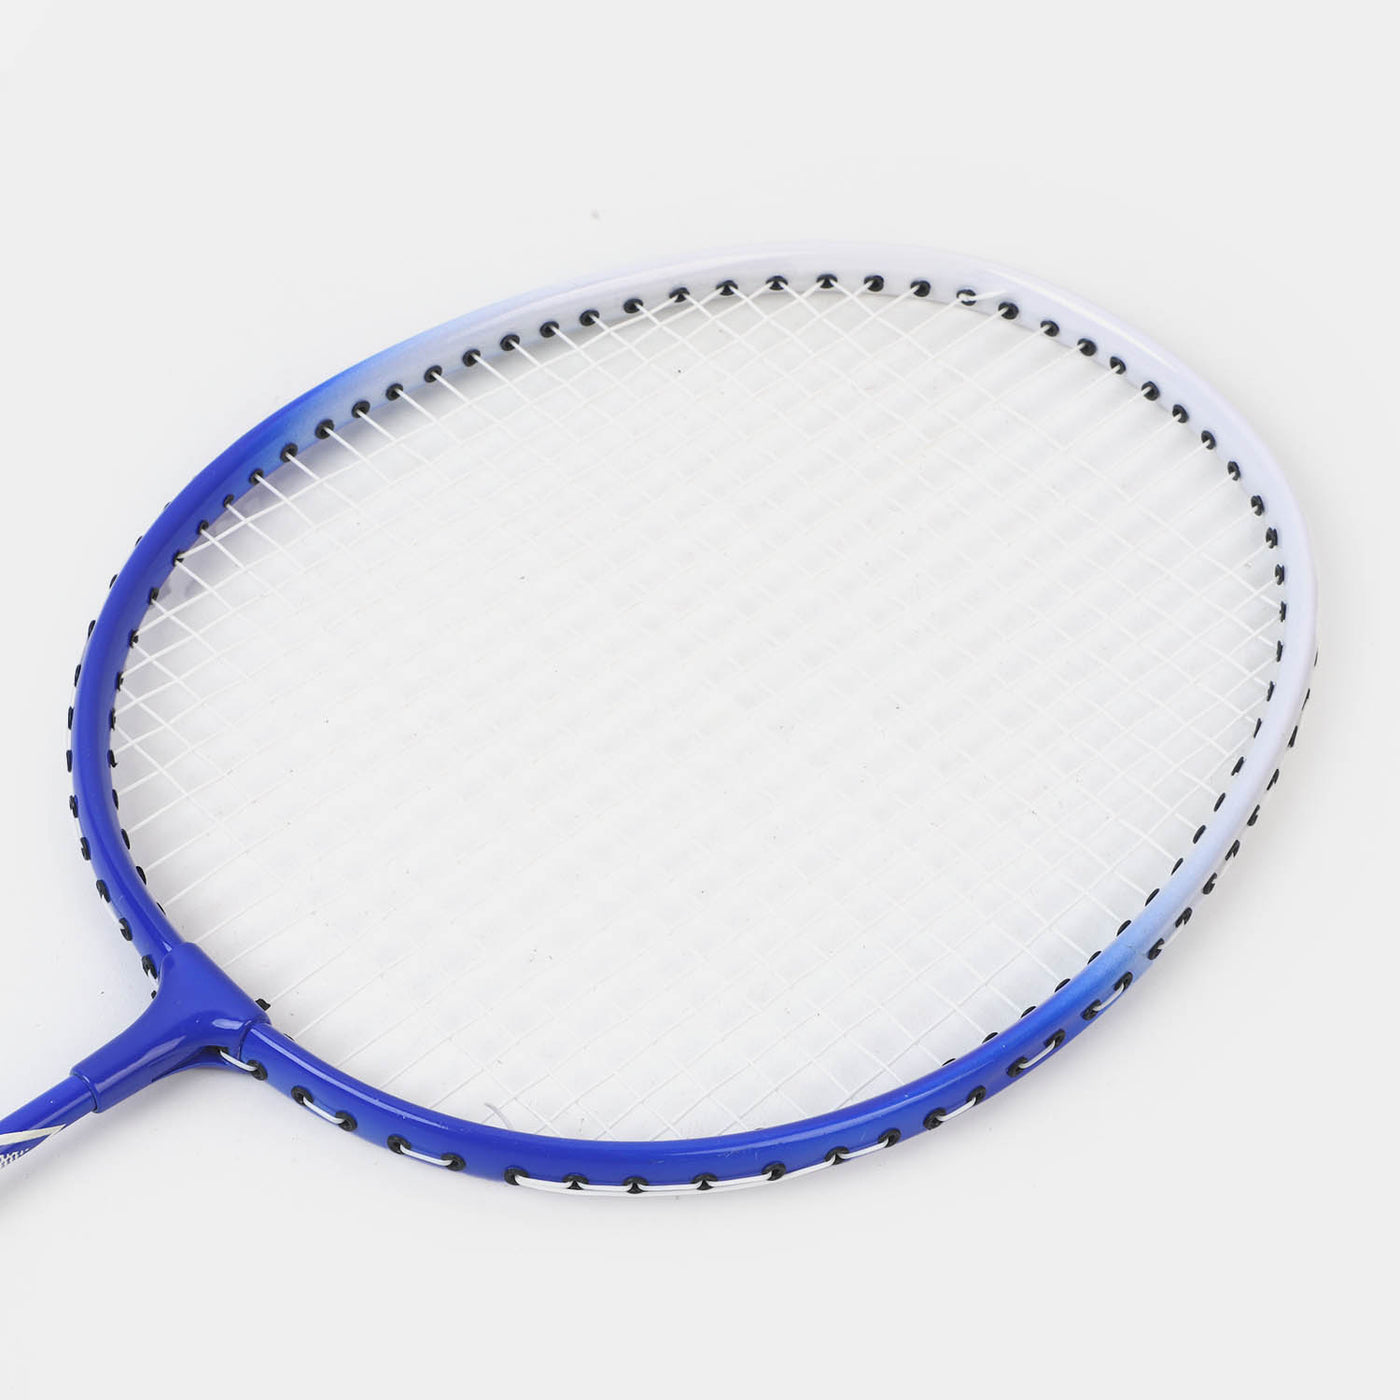 Badminton Racket Pair With Carrying Bag